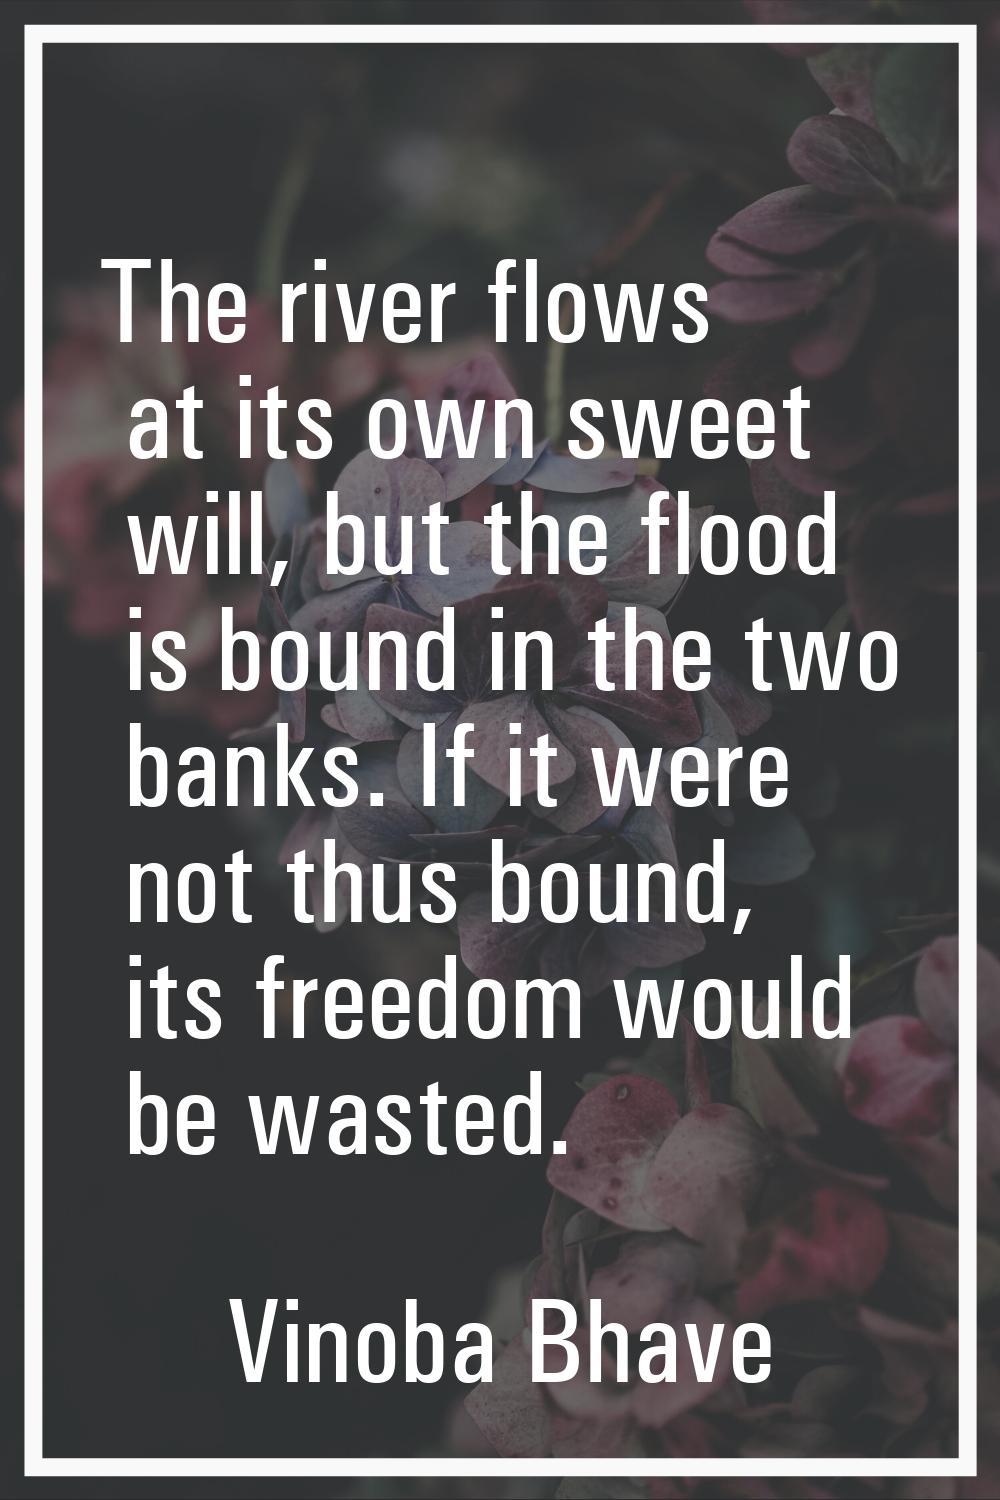 The river flows at its own sweet will, but the flood is bound in the two banks. If it were not thus